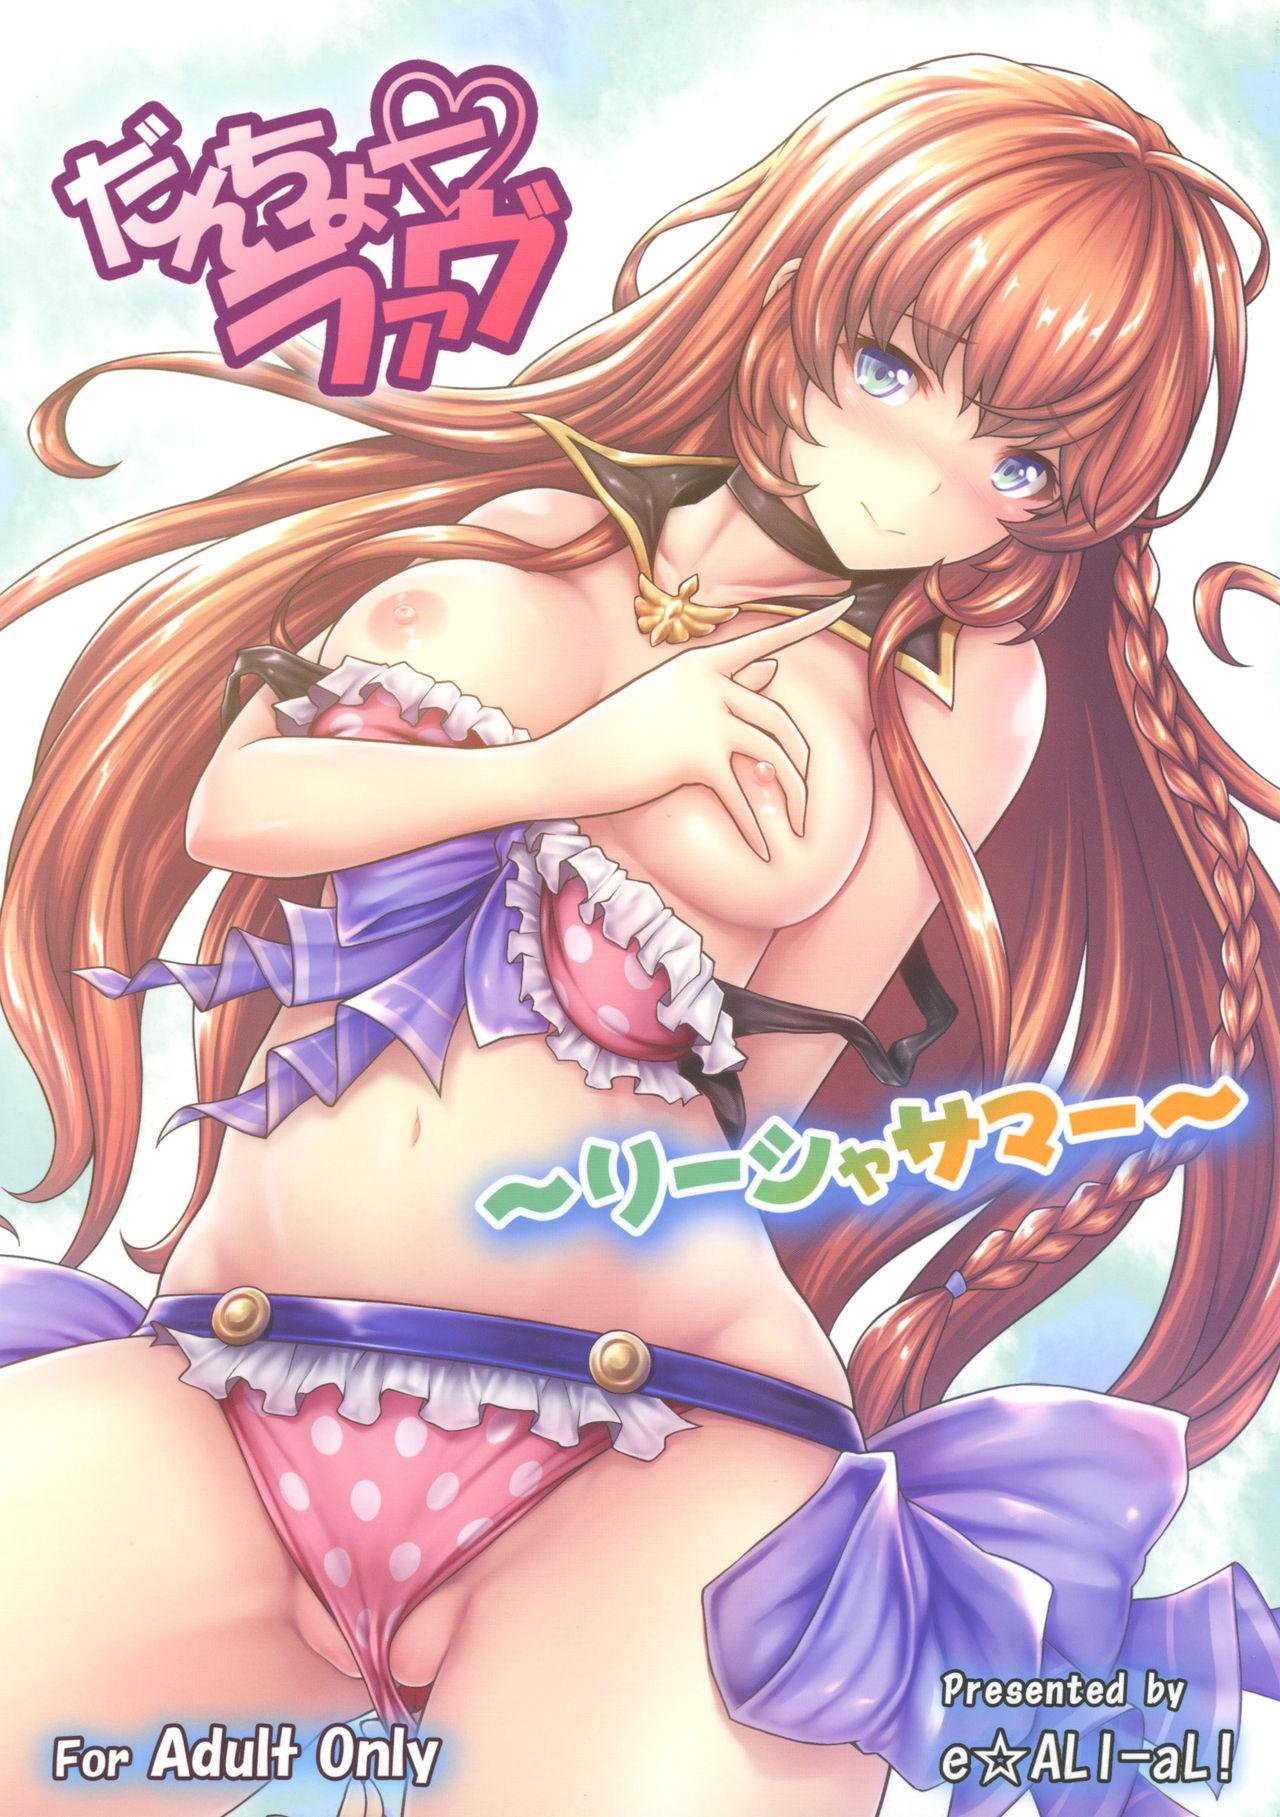 Jerking Off Danchou Love - Granblue fantasy Free 18 Year Old Porn - Page 1